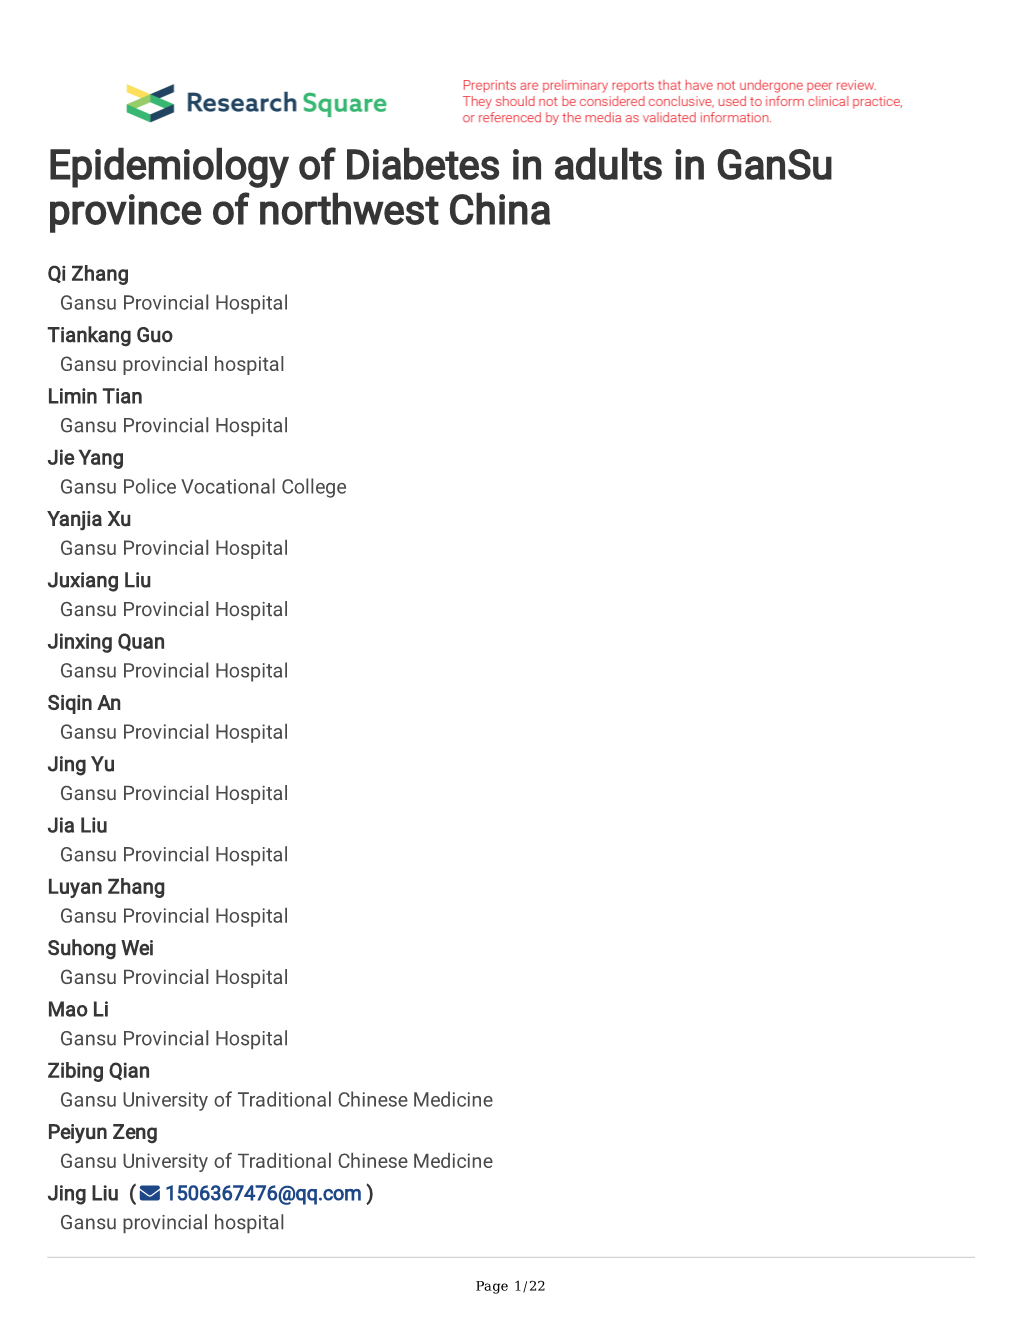 Epidemiology of Diabetes in Adults in Gansu Province of Northwest China